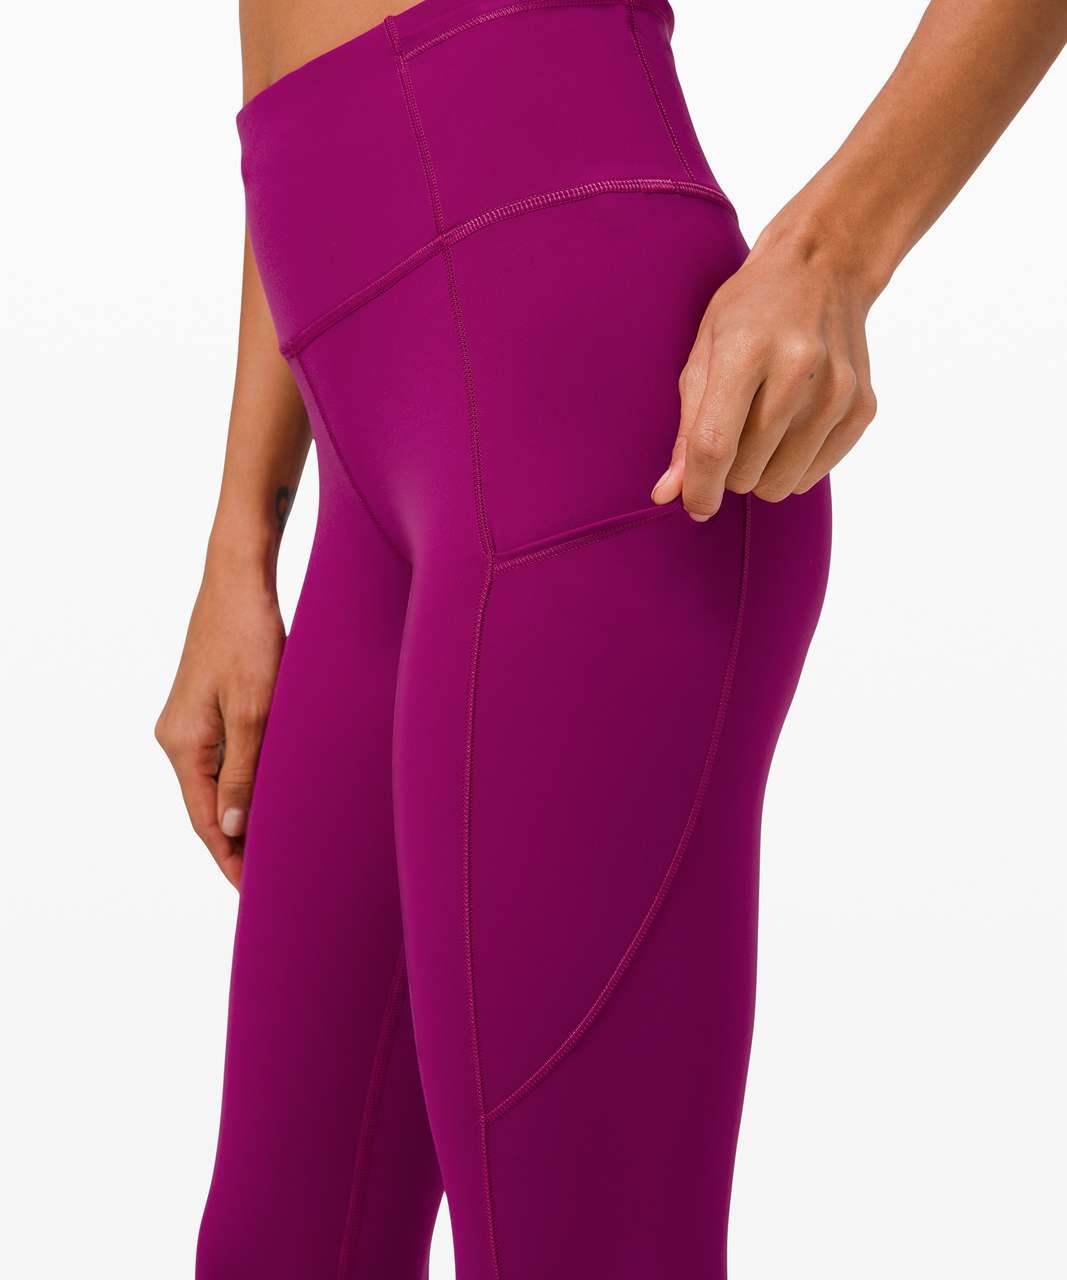 Lululemon Fast and Free High-Rise Tight 28" *Non-Reflective Brushed Nulux - Deep Fuschia